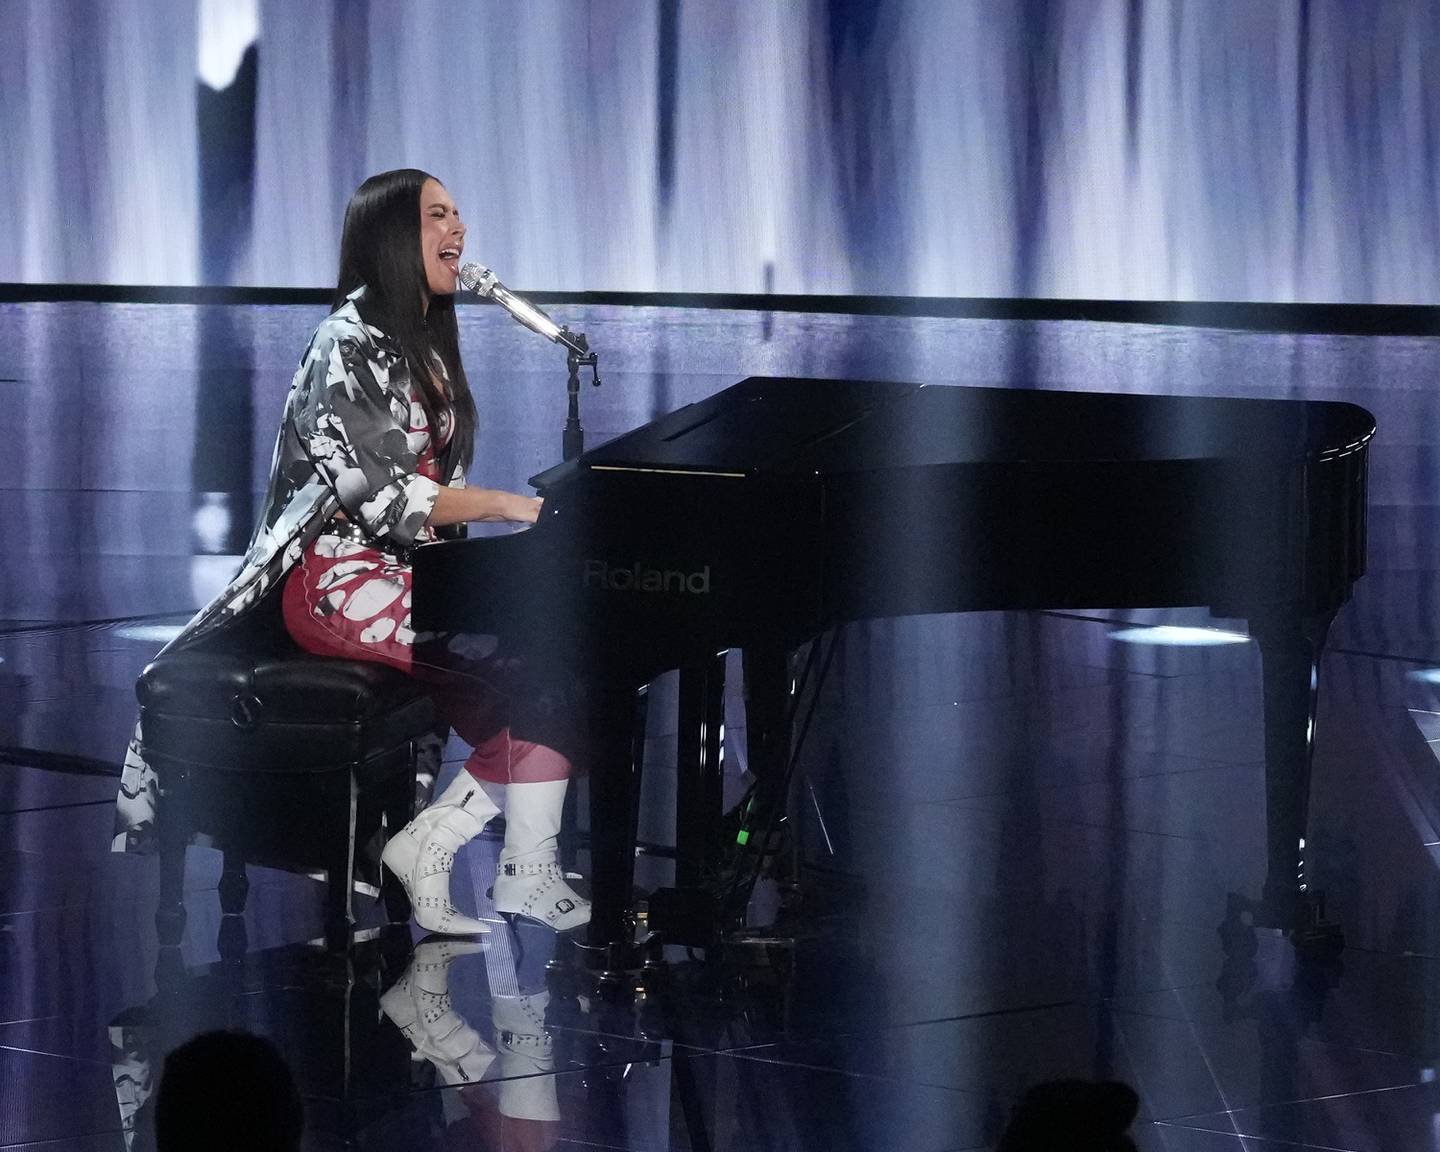 Caroline Baran, who performs under the name Kaeyra, did not make it through Monday’s episode of American Idol, where the top 12 performers were selected.